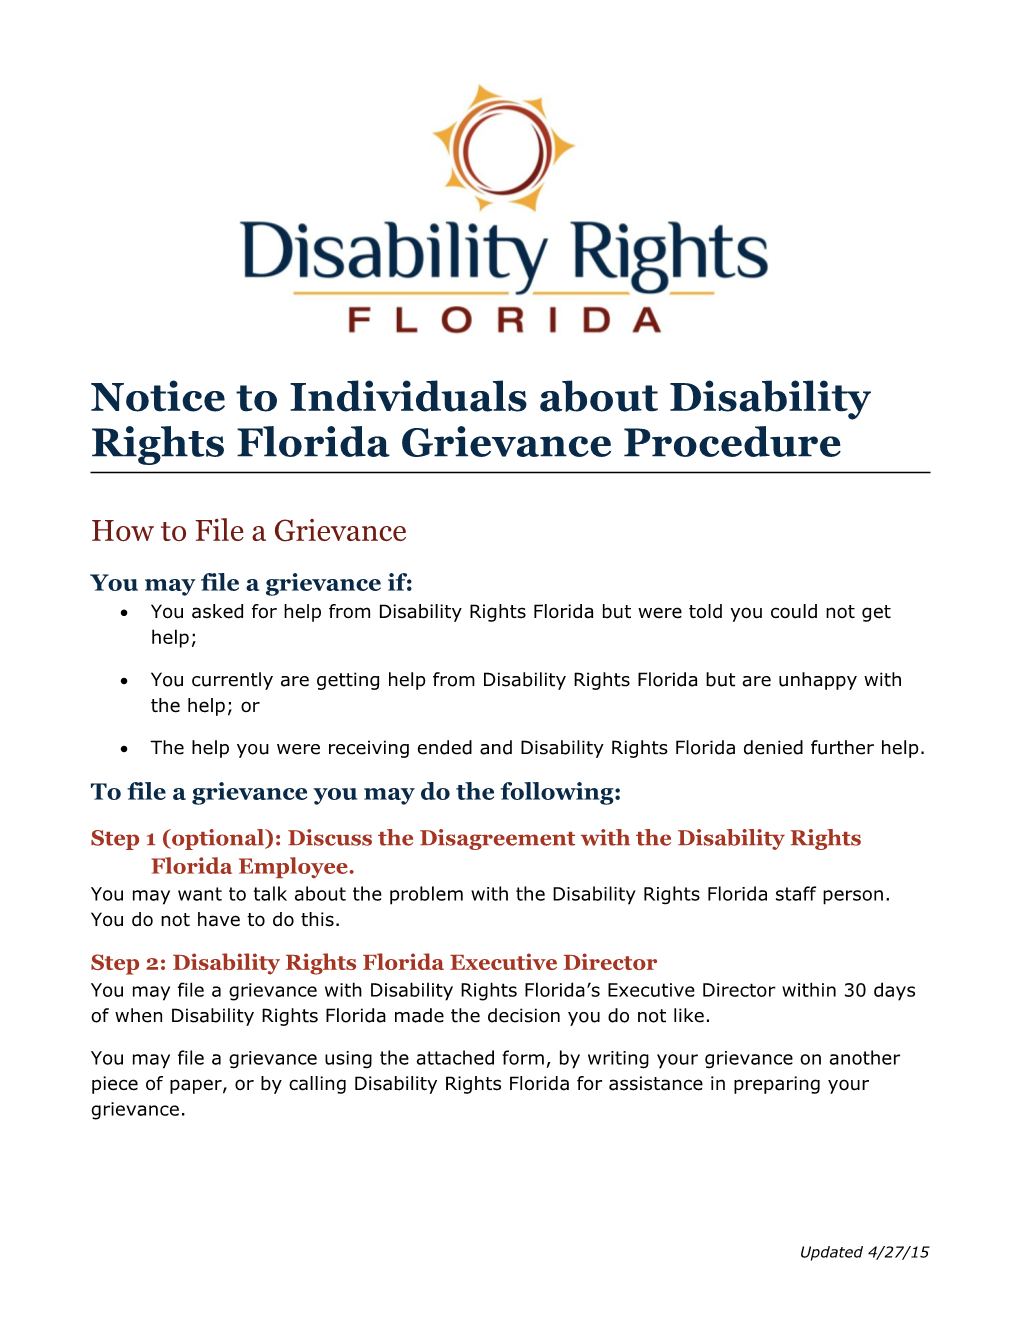 Notice to Individuals About Disability Rights Florida Grievance Procedure